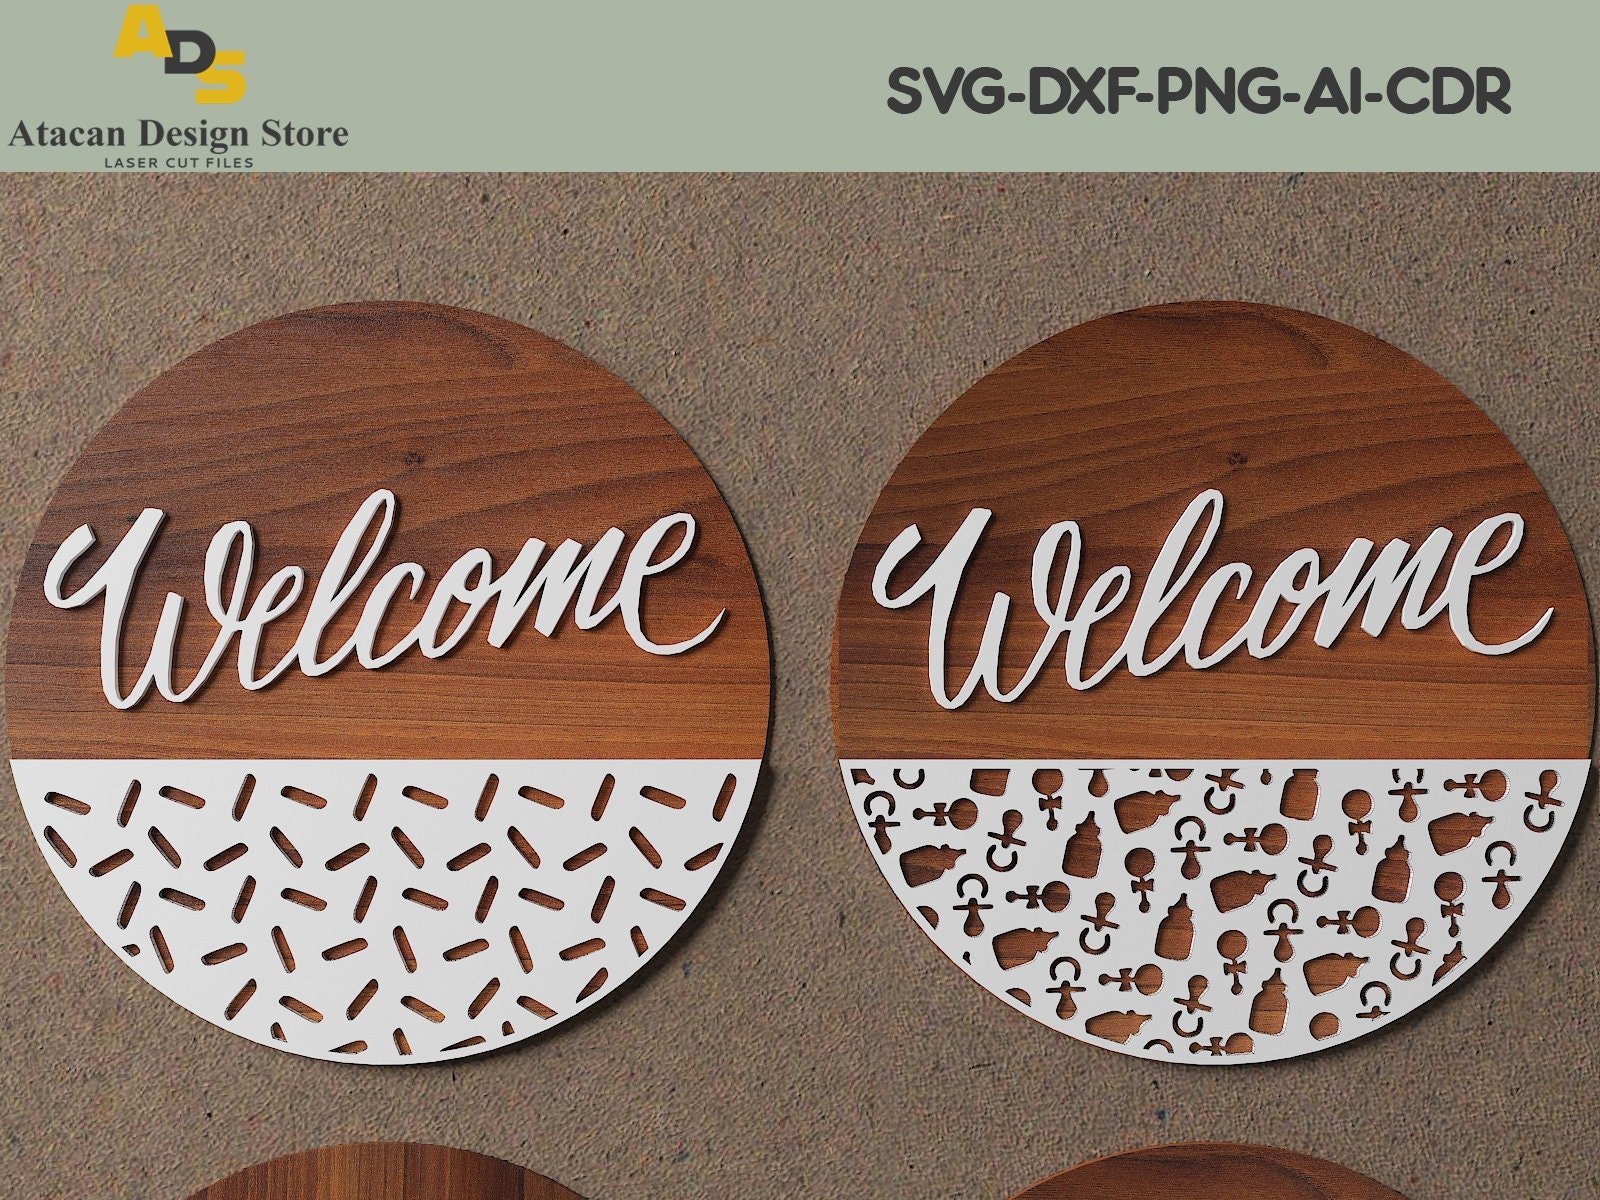 Door hanging signs / Welcome svg sign / Wood Cutting files / Round hangers / instant download ADS117